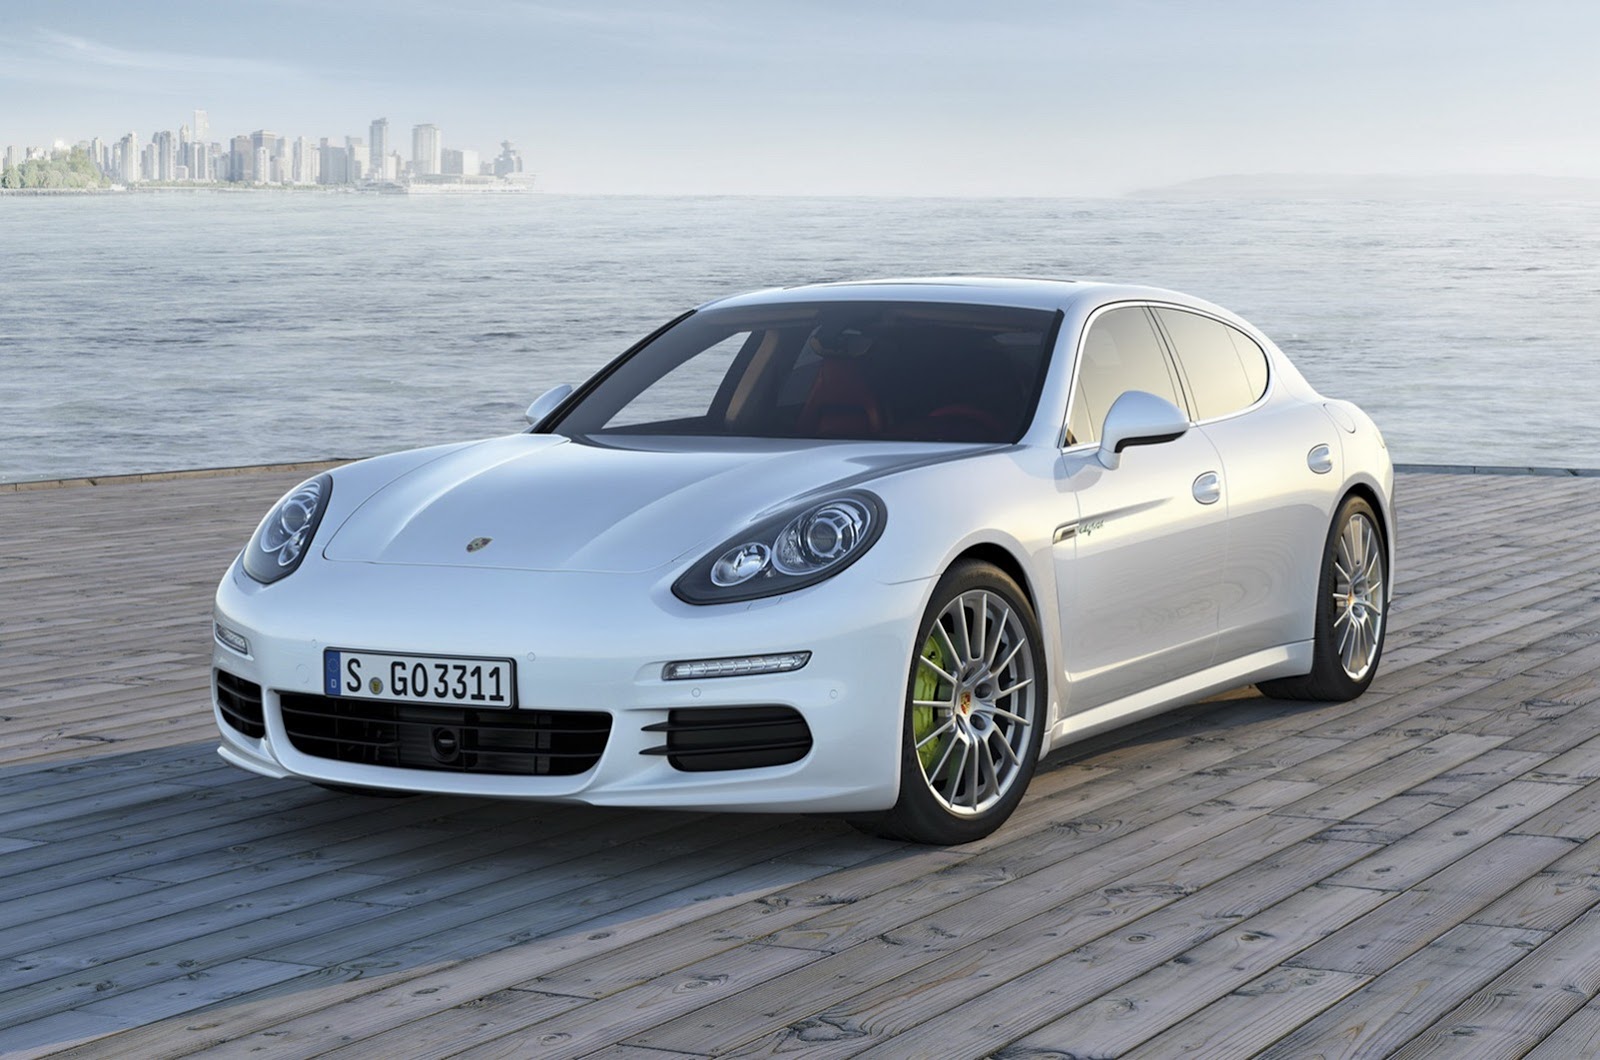 Porsche Launches 2014 Panamera in India at Rs 1.19 crore